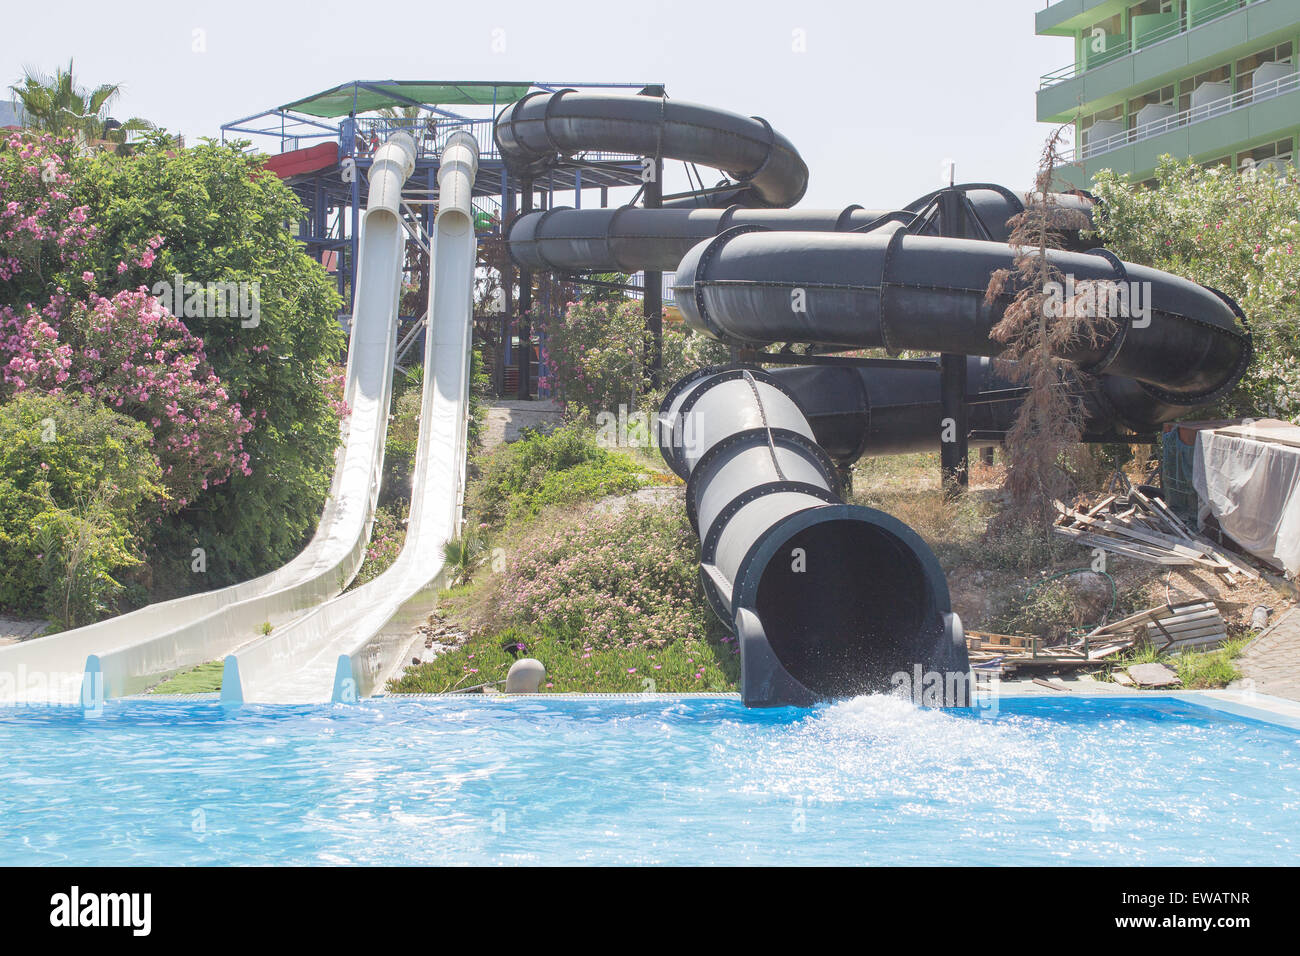 A Water Slide at the Star Beach Water Park Hersonissos, Crete. Stock Photo